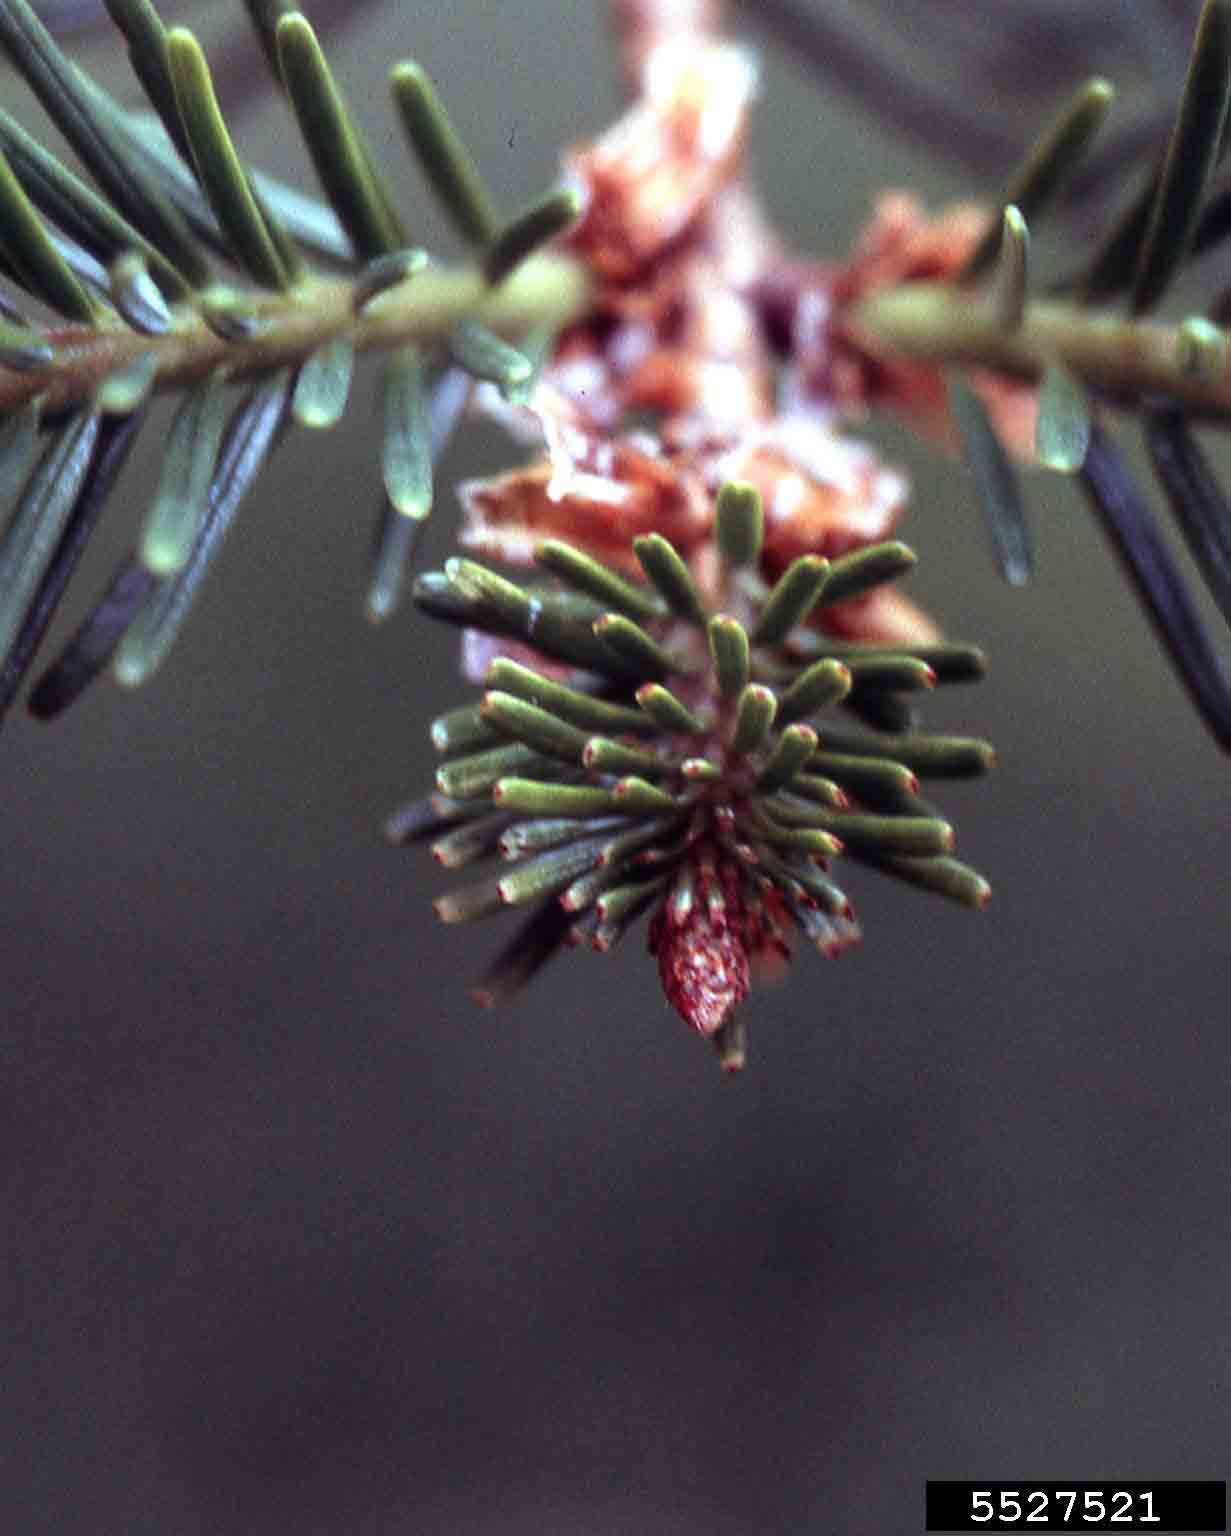 Douglas fir twig with needles and bud